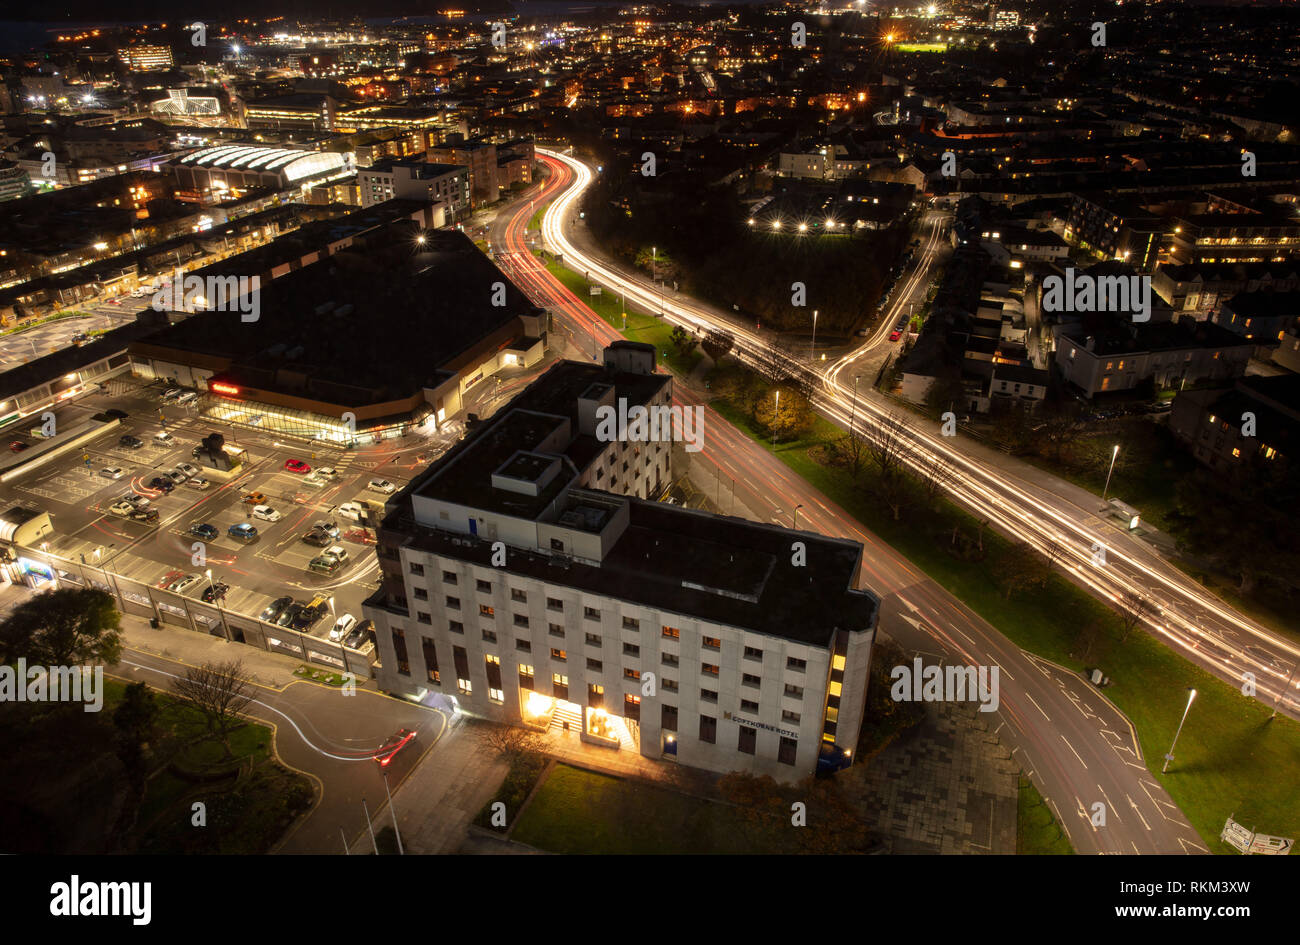 A shot from the top of Beckley Point over The copthorne Hotel in Plymouth Late one evening. Stock Photo